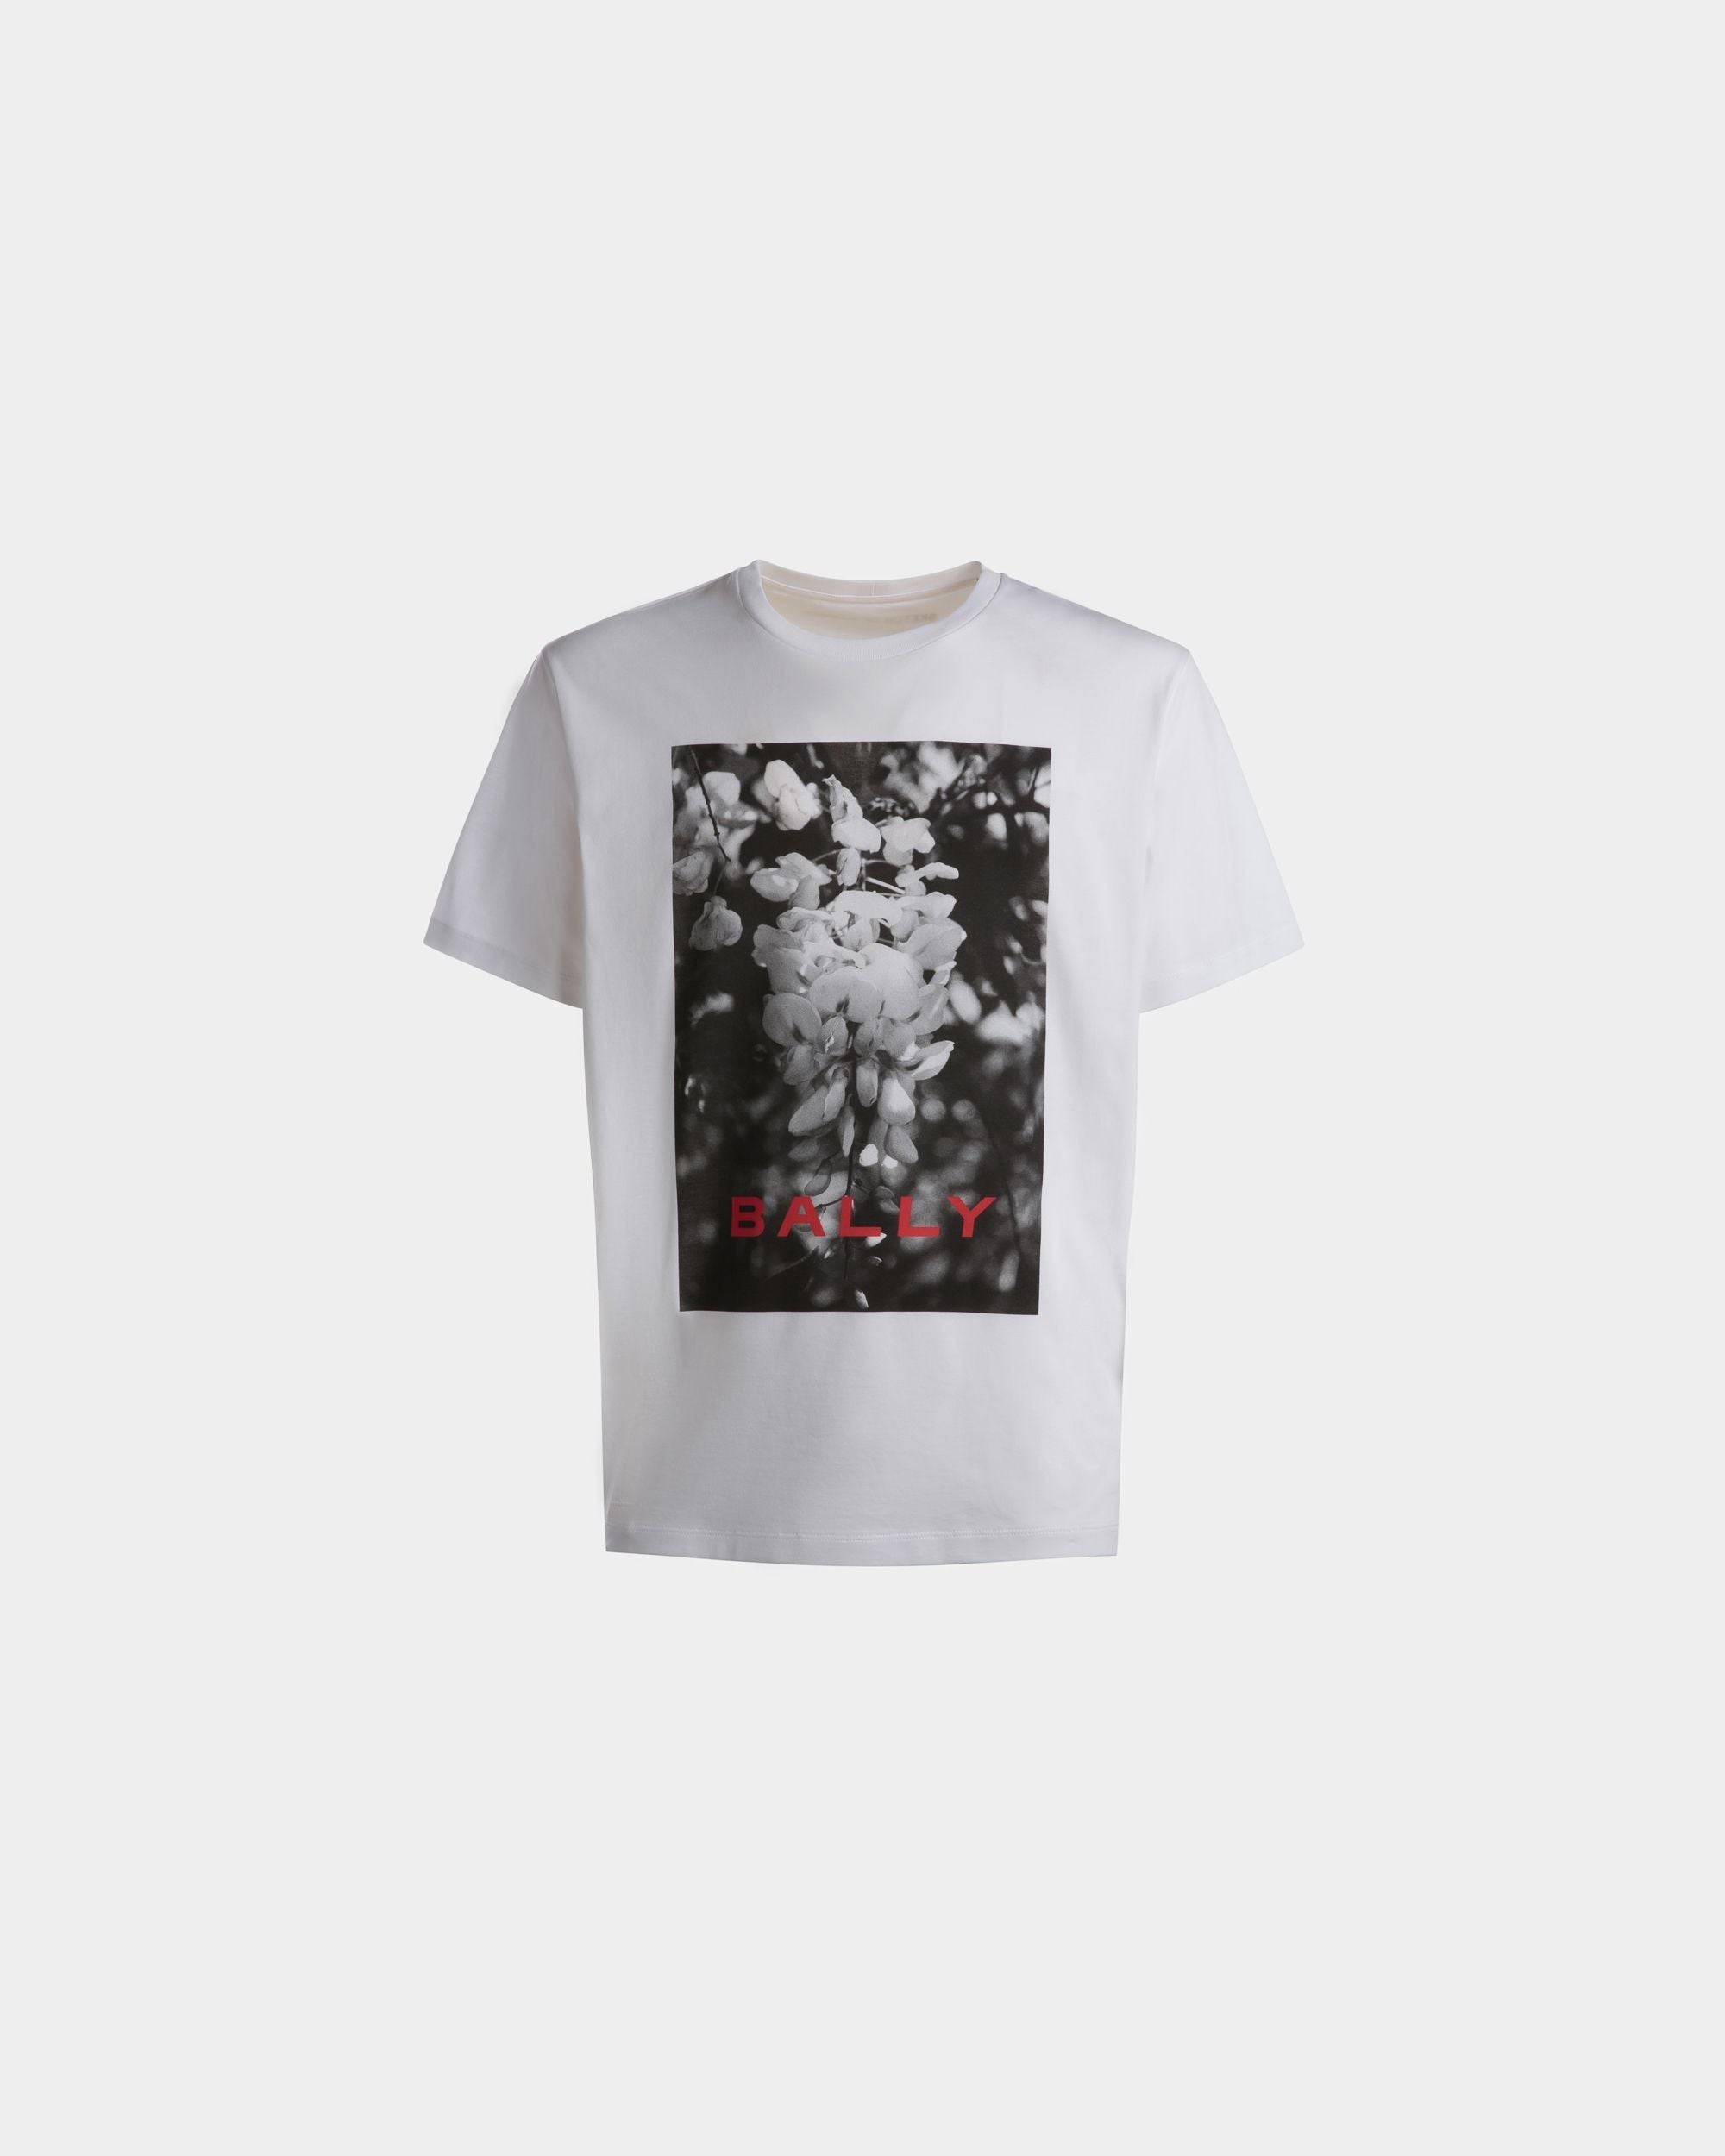 Men's Printed T-Shirt in White Cotton | Bally | Still Life Front